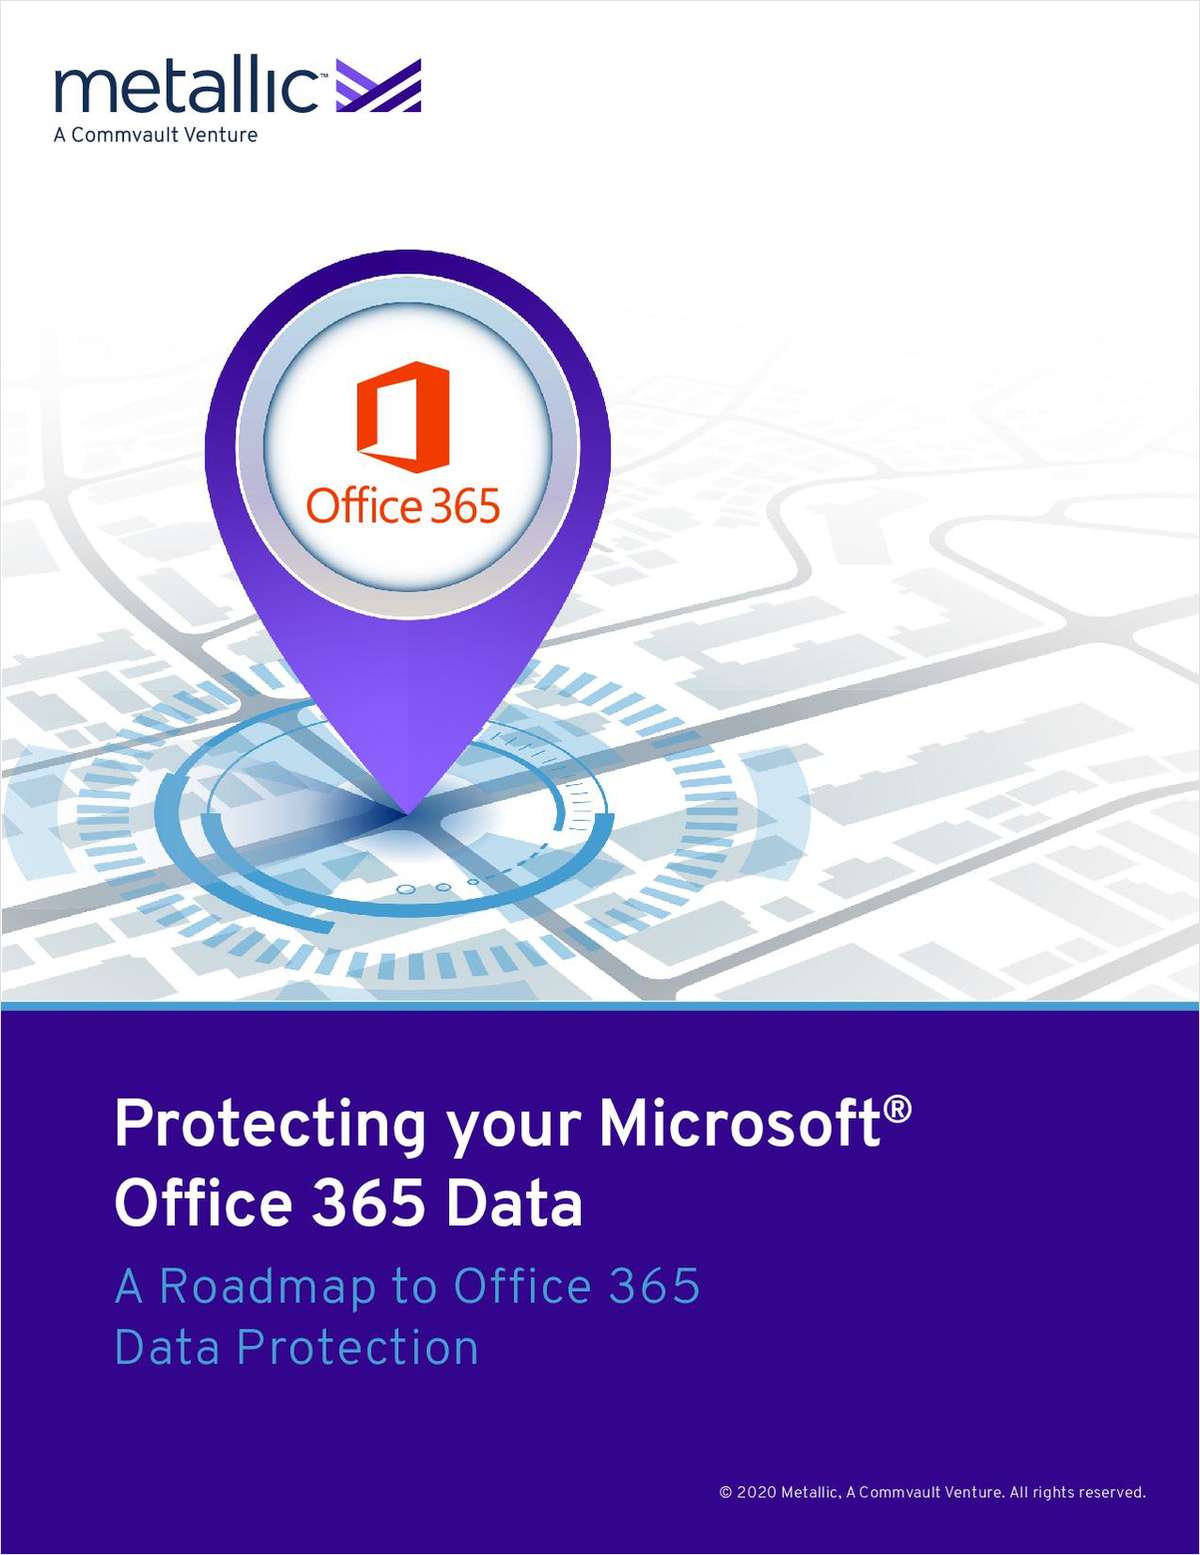 How to Protect your Microsoft® Office 365 Data